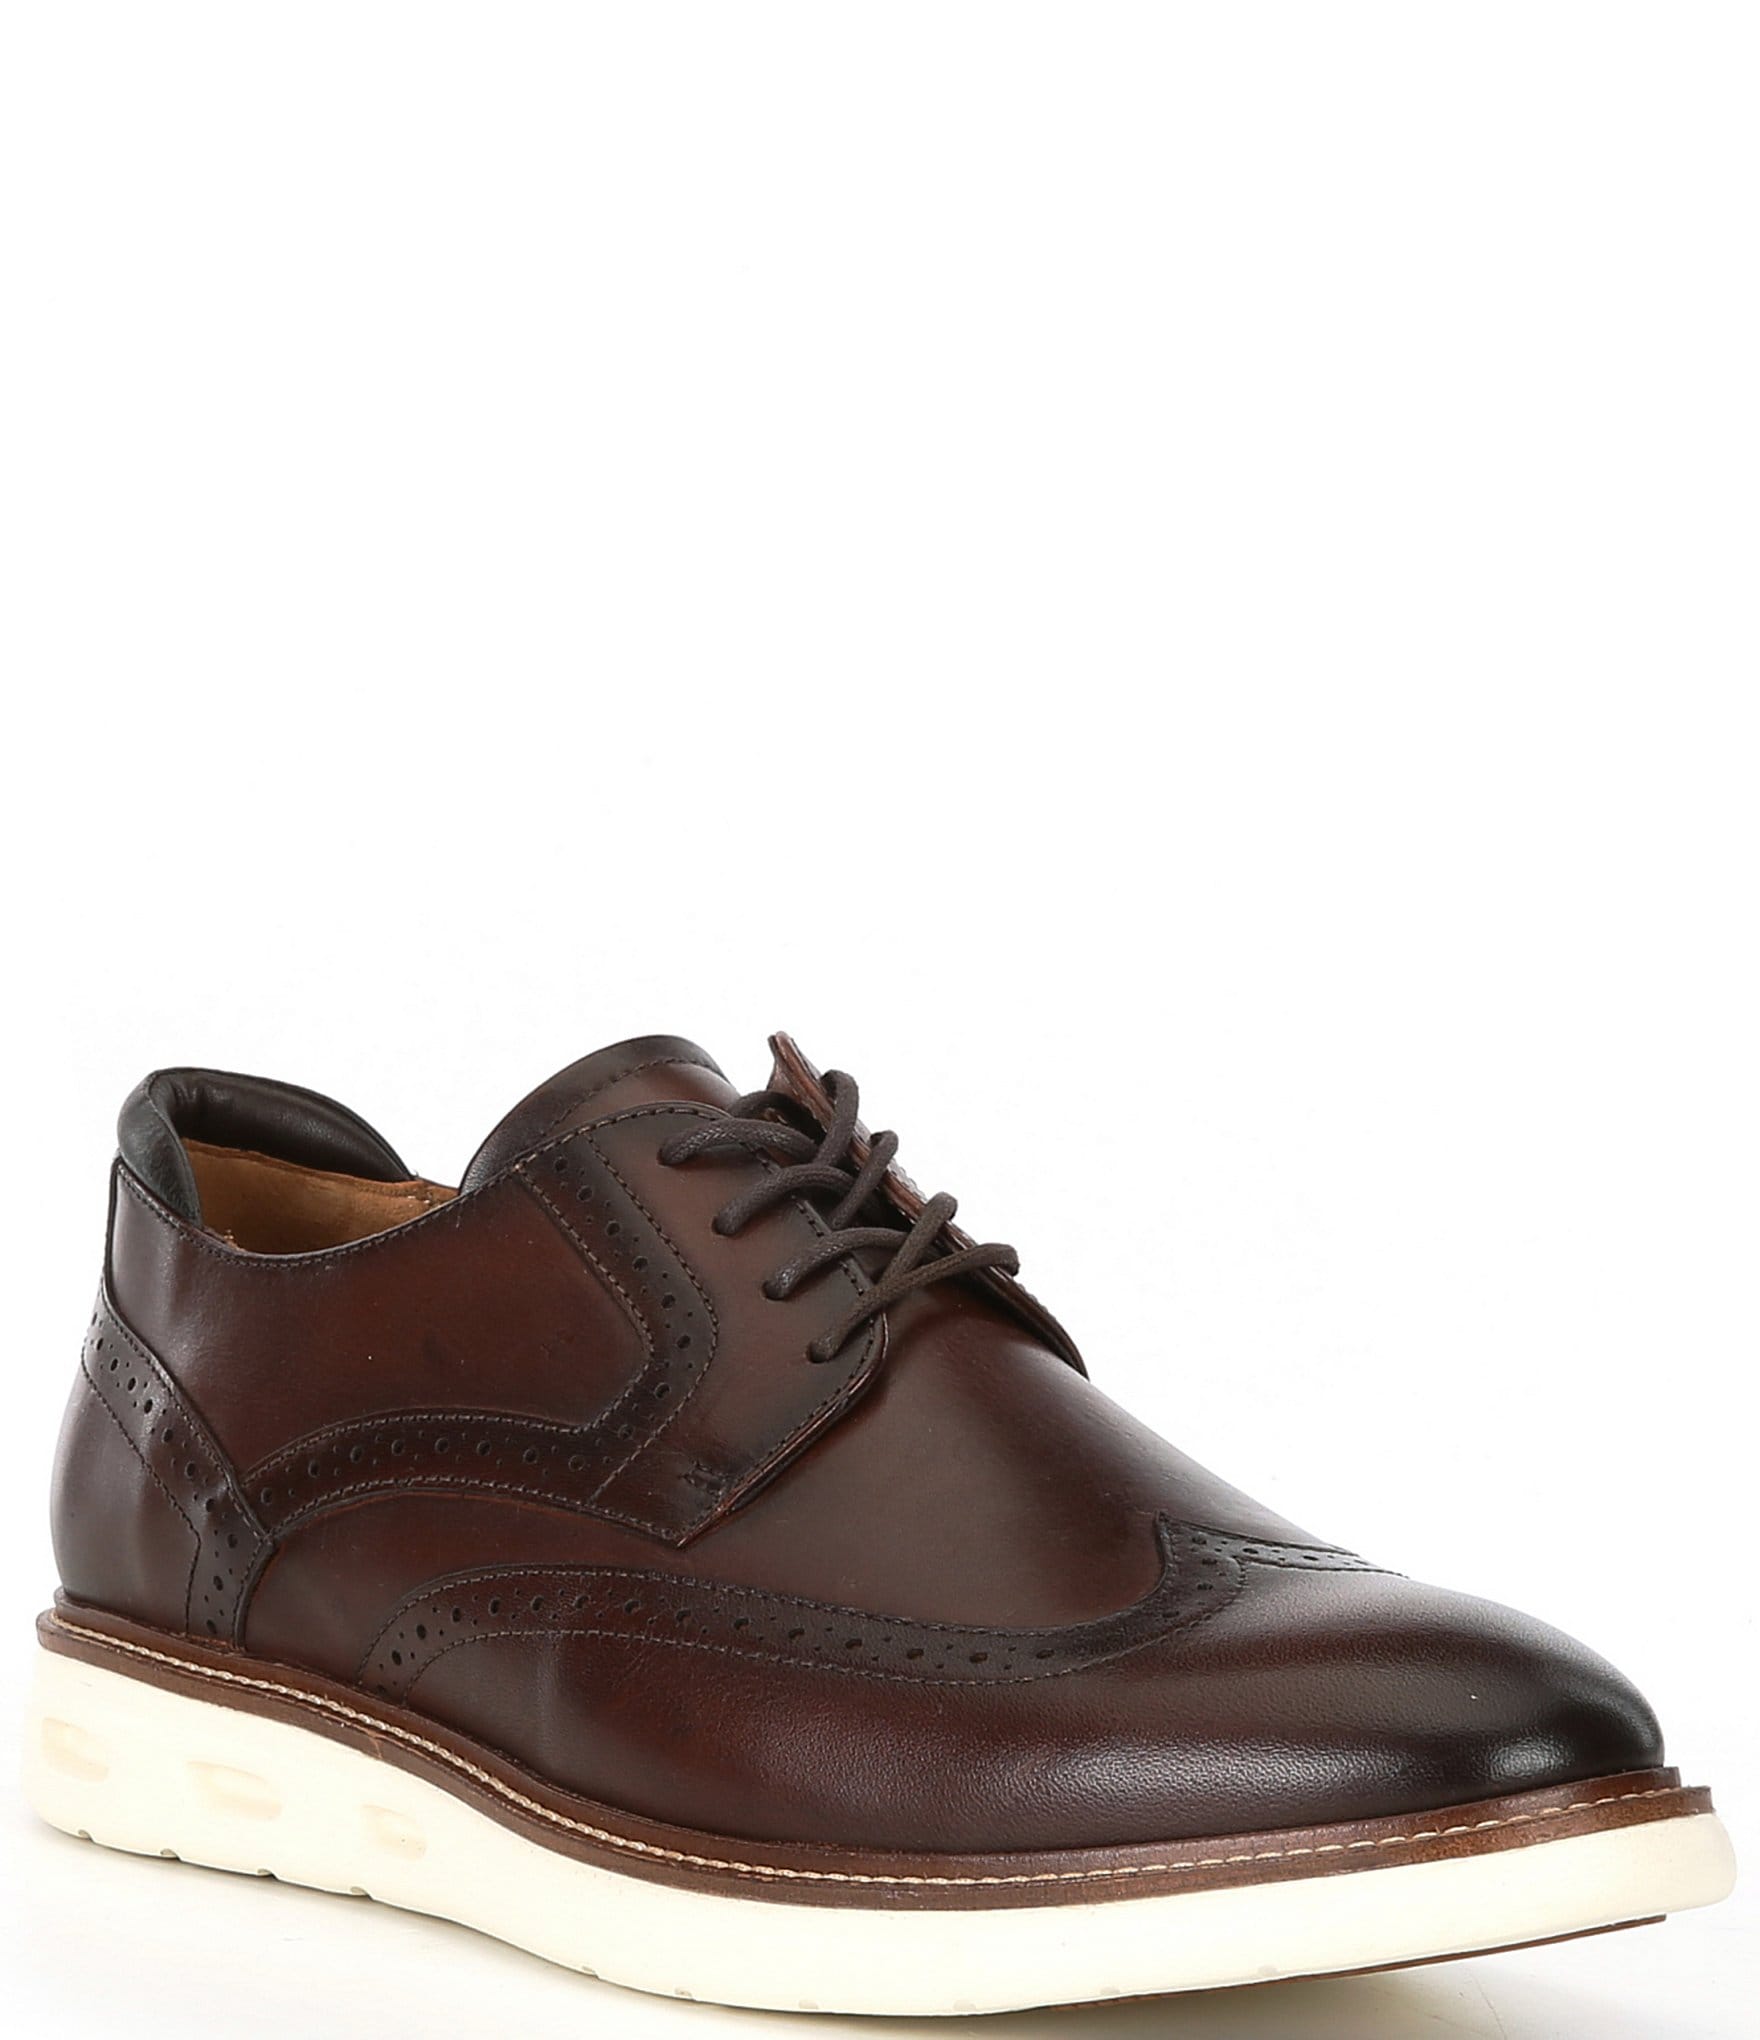 Flag LTD. Men's Stafford Lace-to-Toe Sneakers